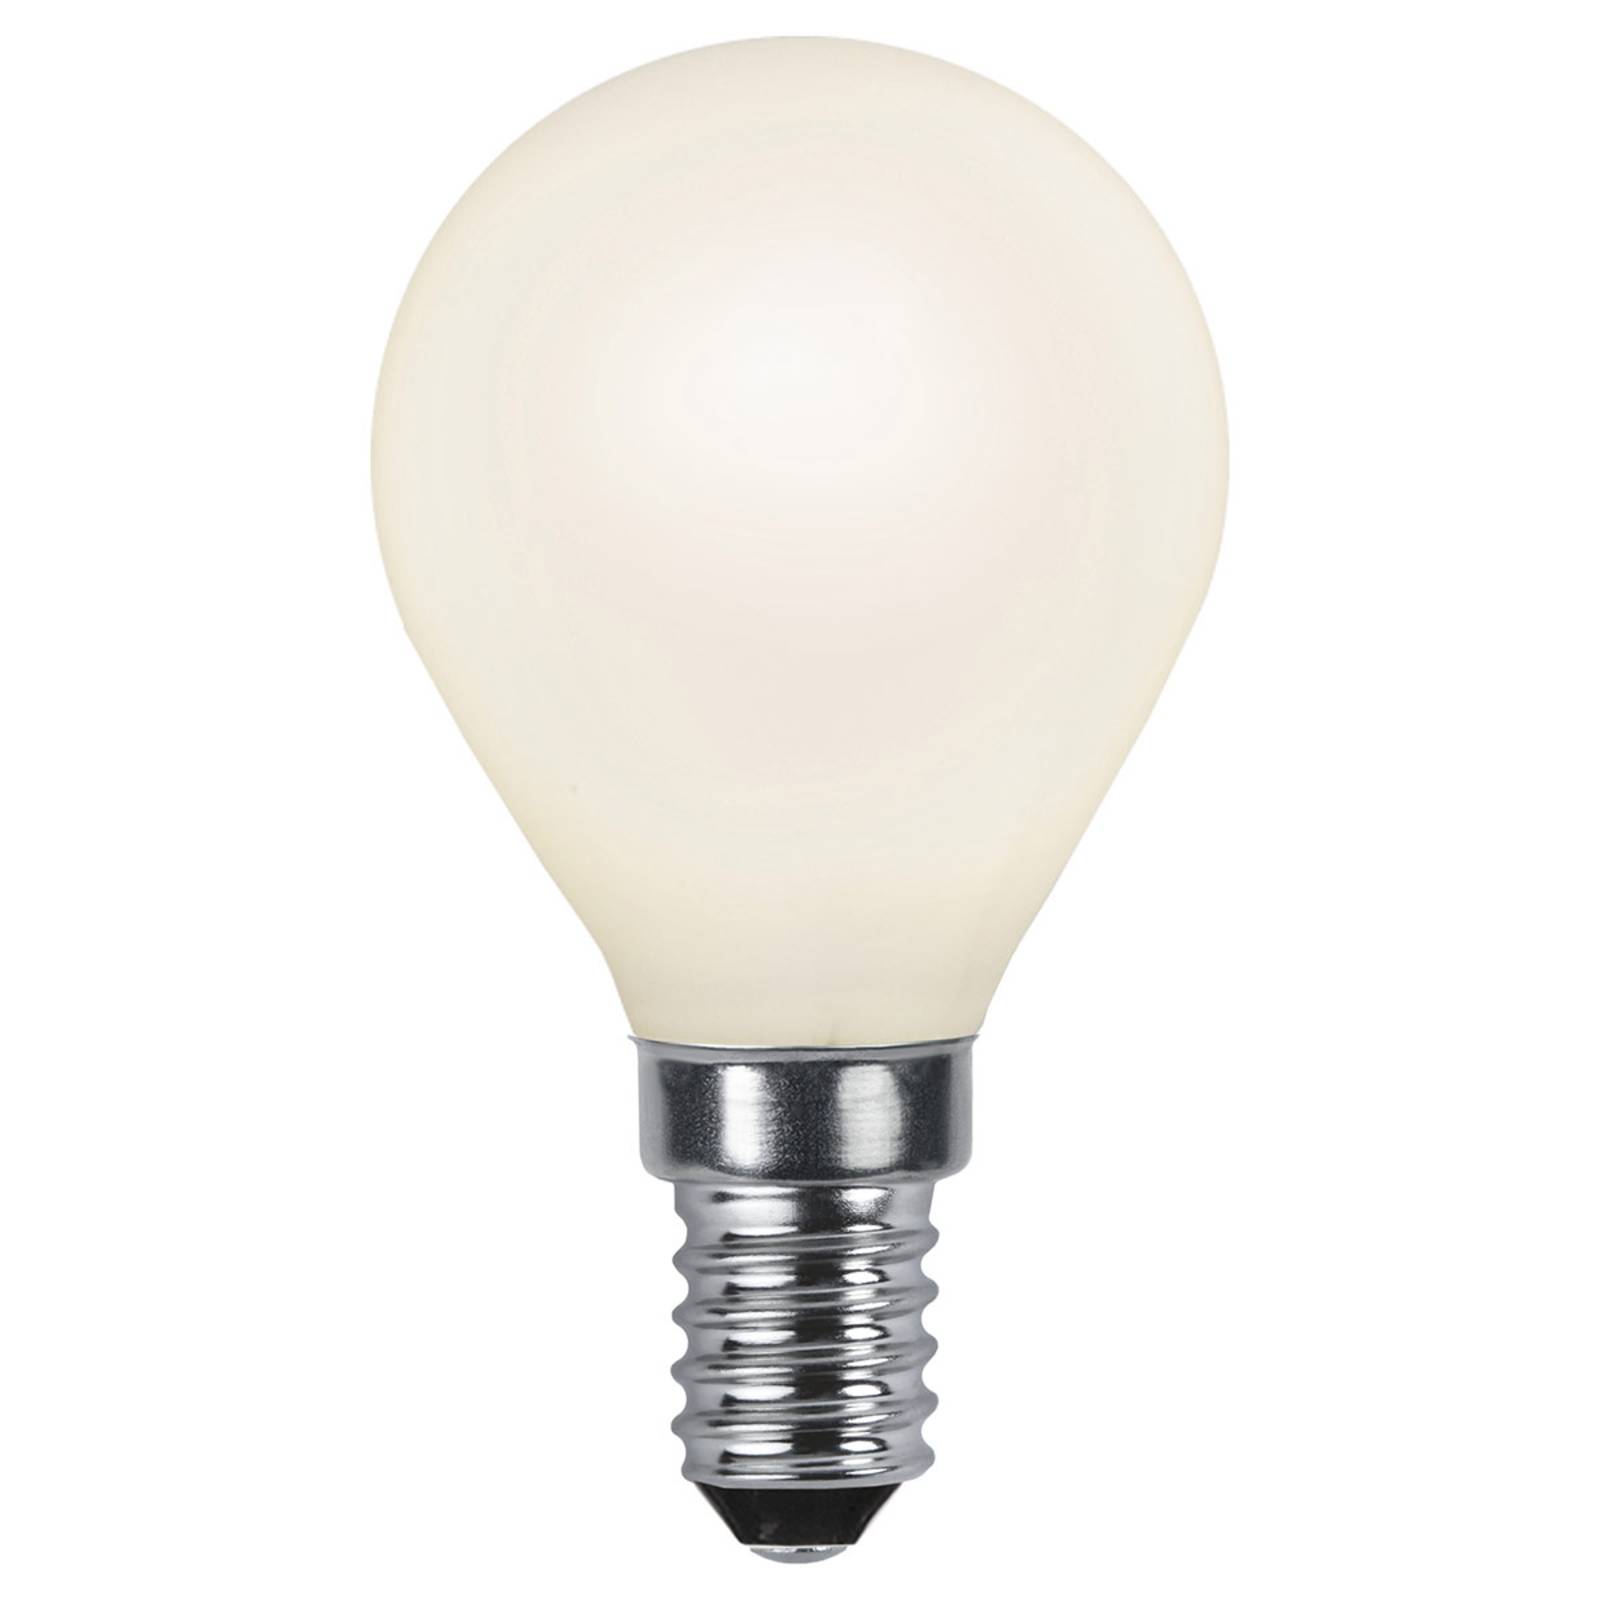 Image of STAR TRADING Ampoule goutte LED E14 2 700 K opale Ra90 3 W 7391482032164